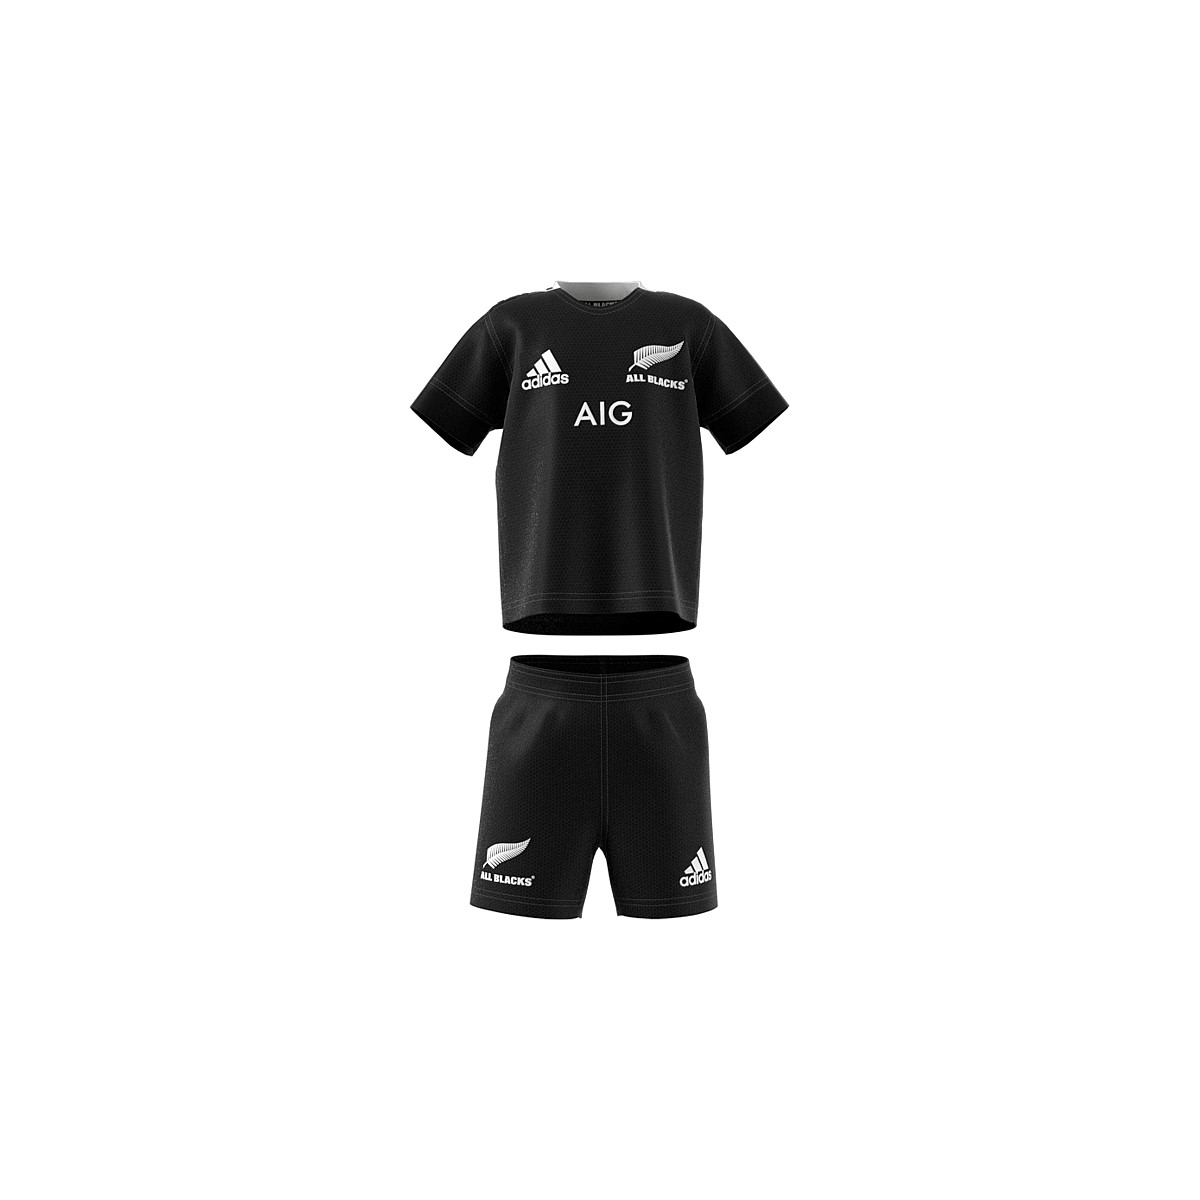 Children's Clothing Online | Air New Zealand's Airpoints™ Store